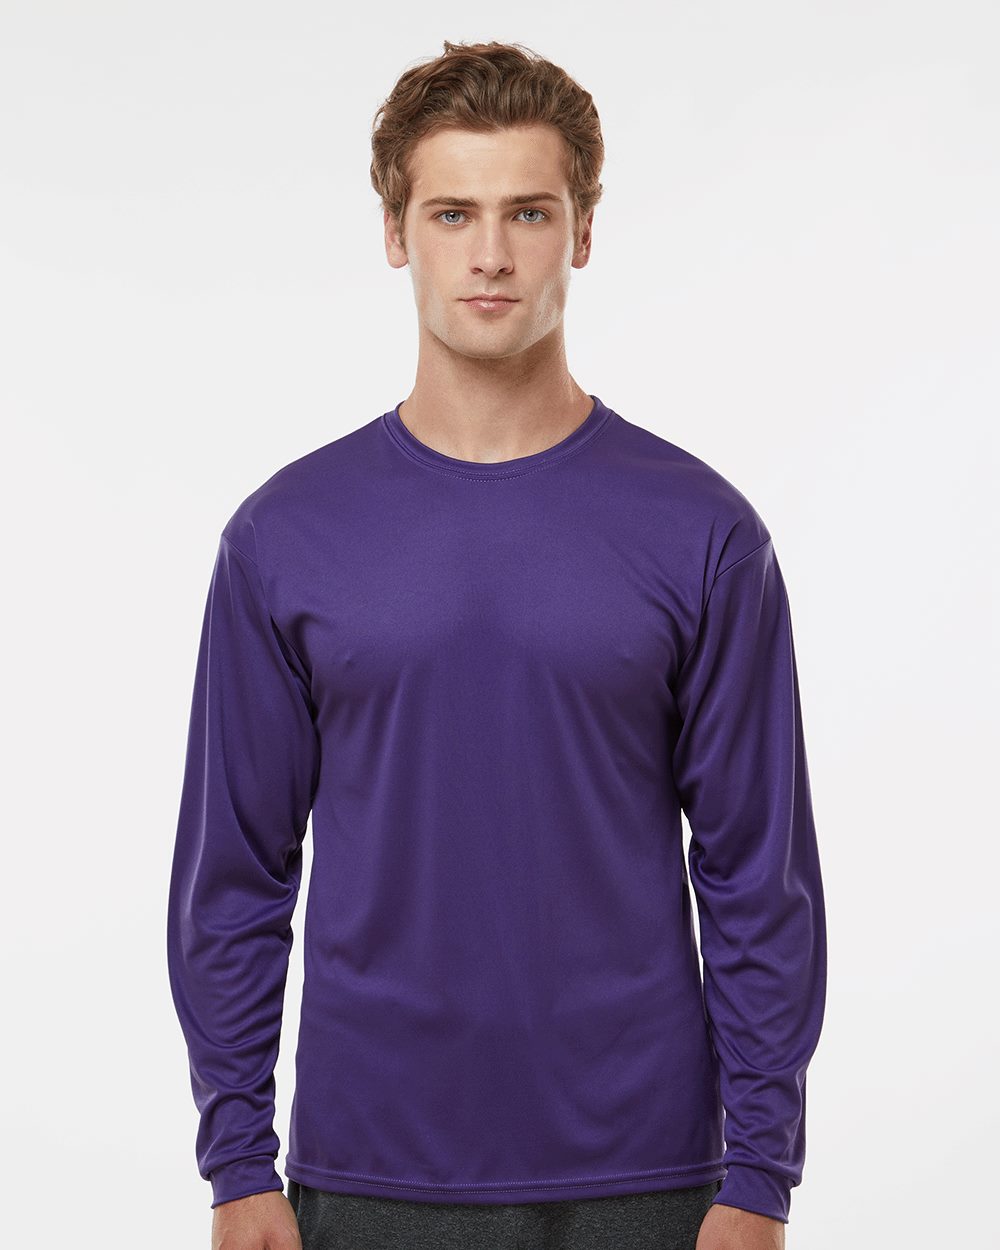 C2 Sport Men's sizes S-3XL Long Sleeve Performance T-Shirts dry wicking 5104 